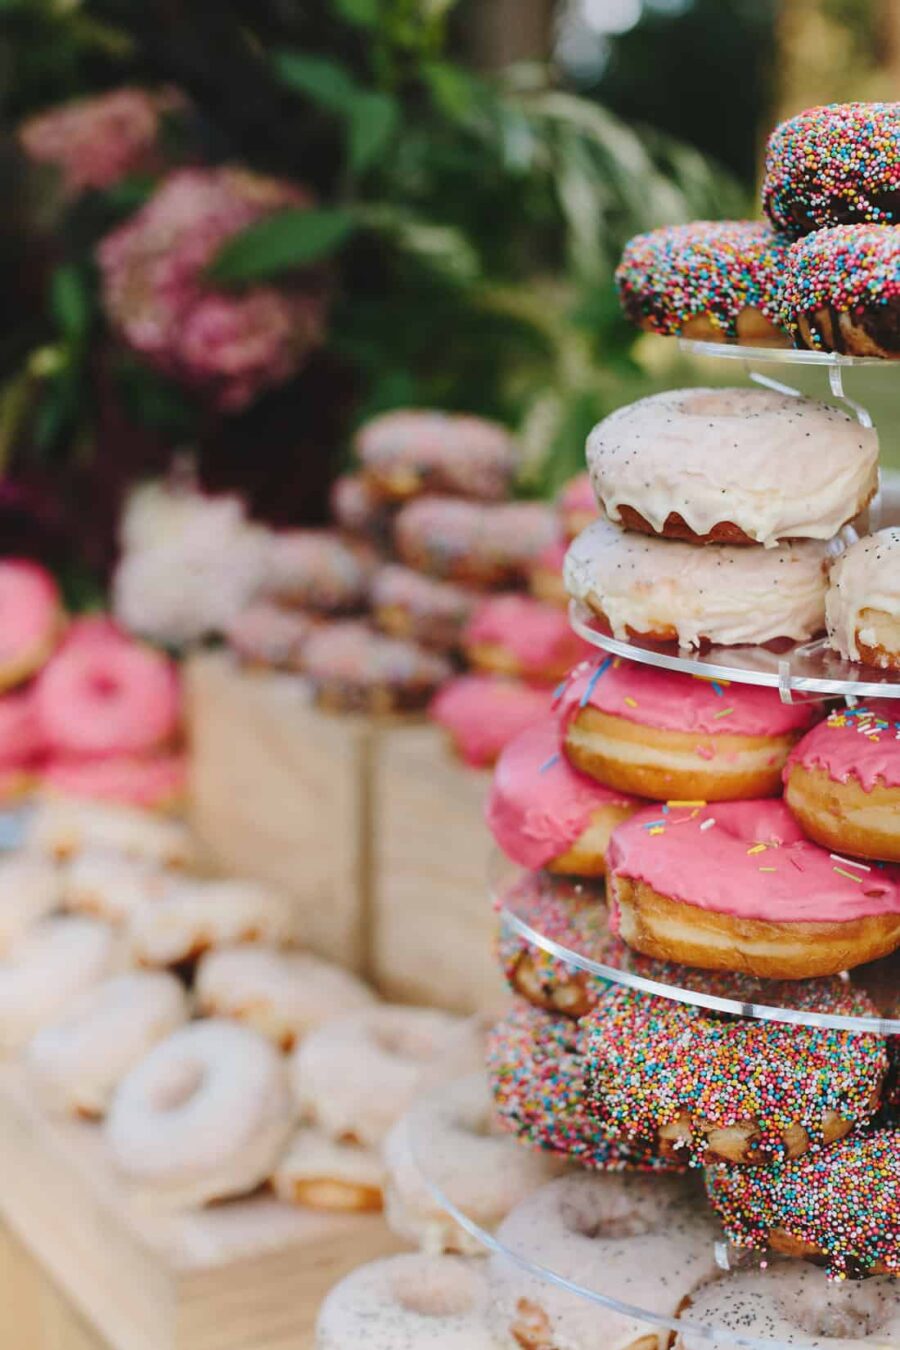 Who needs cake? Amazing donut display for a fun outdoor wedding